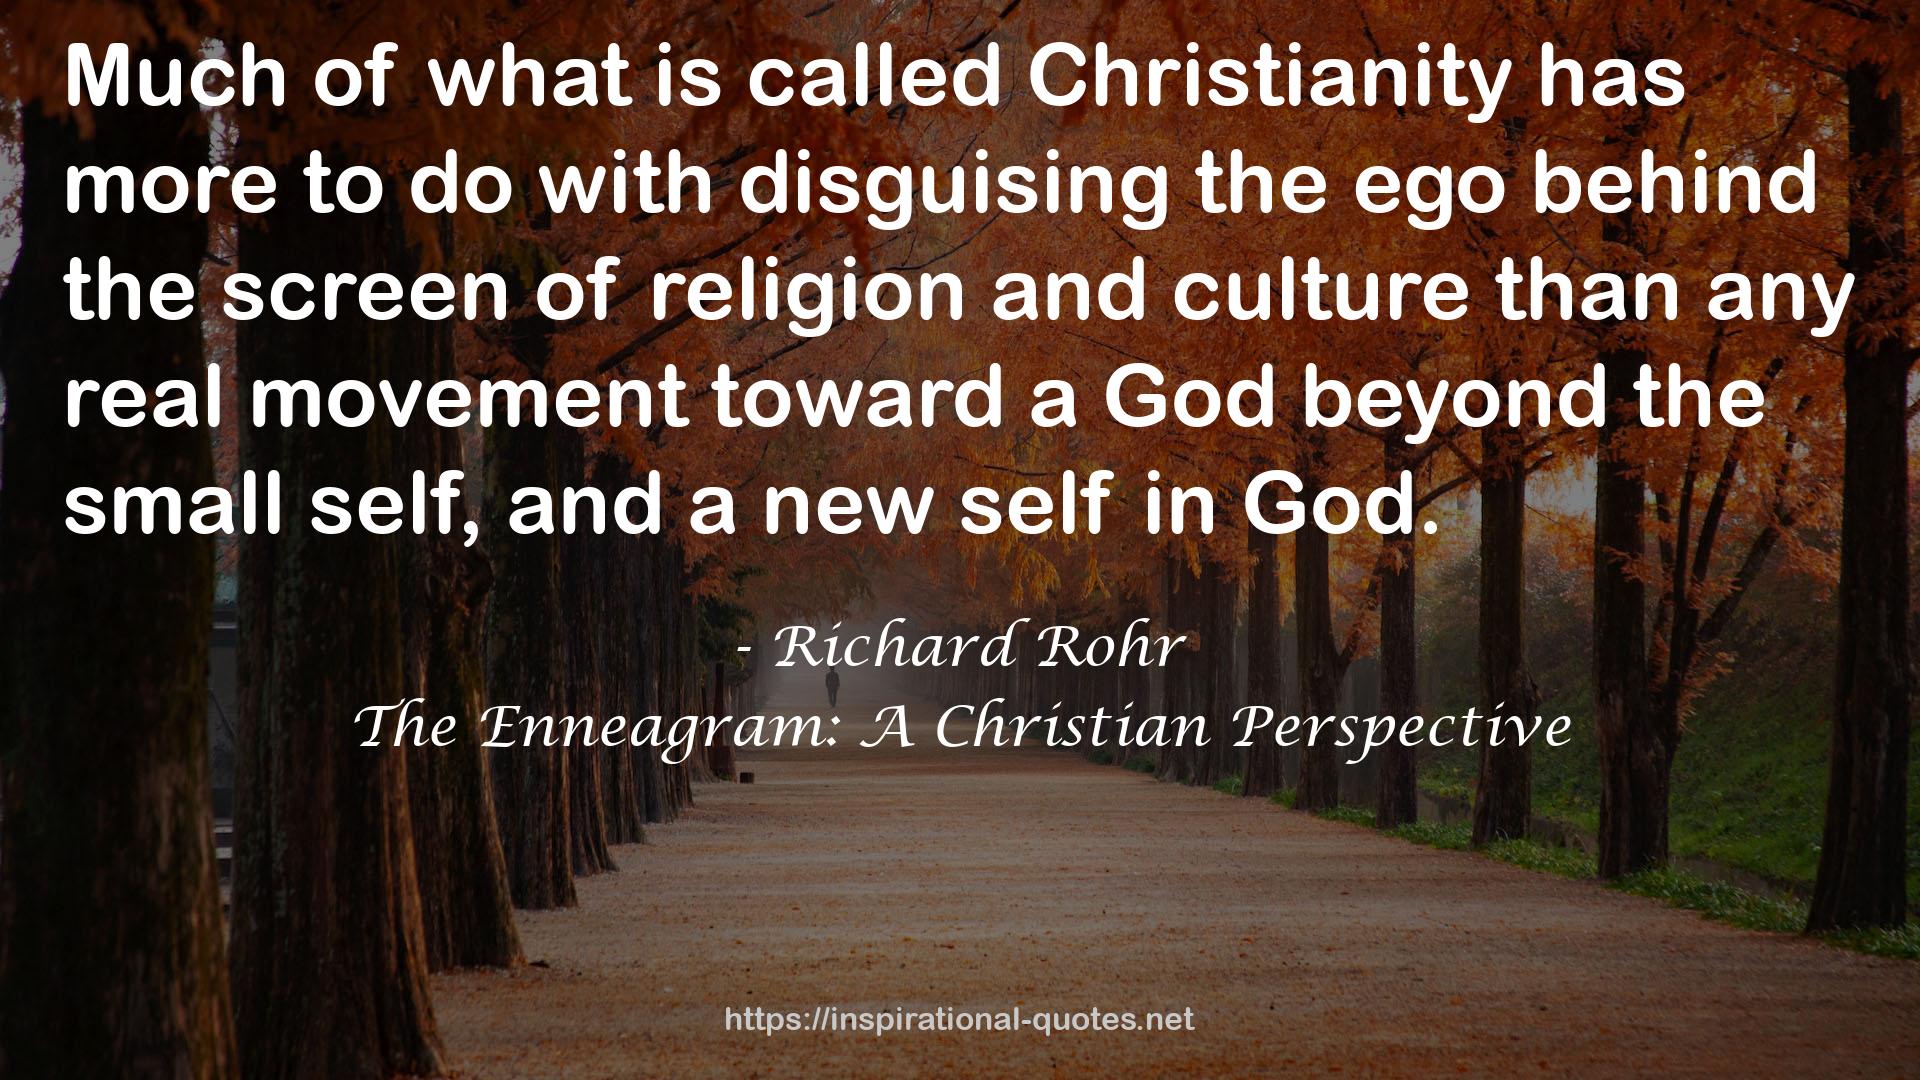 The Enneagram: A Christian Perspective QUOTES